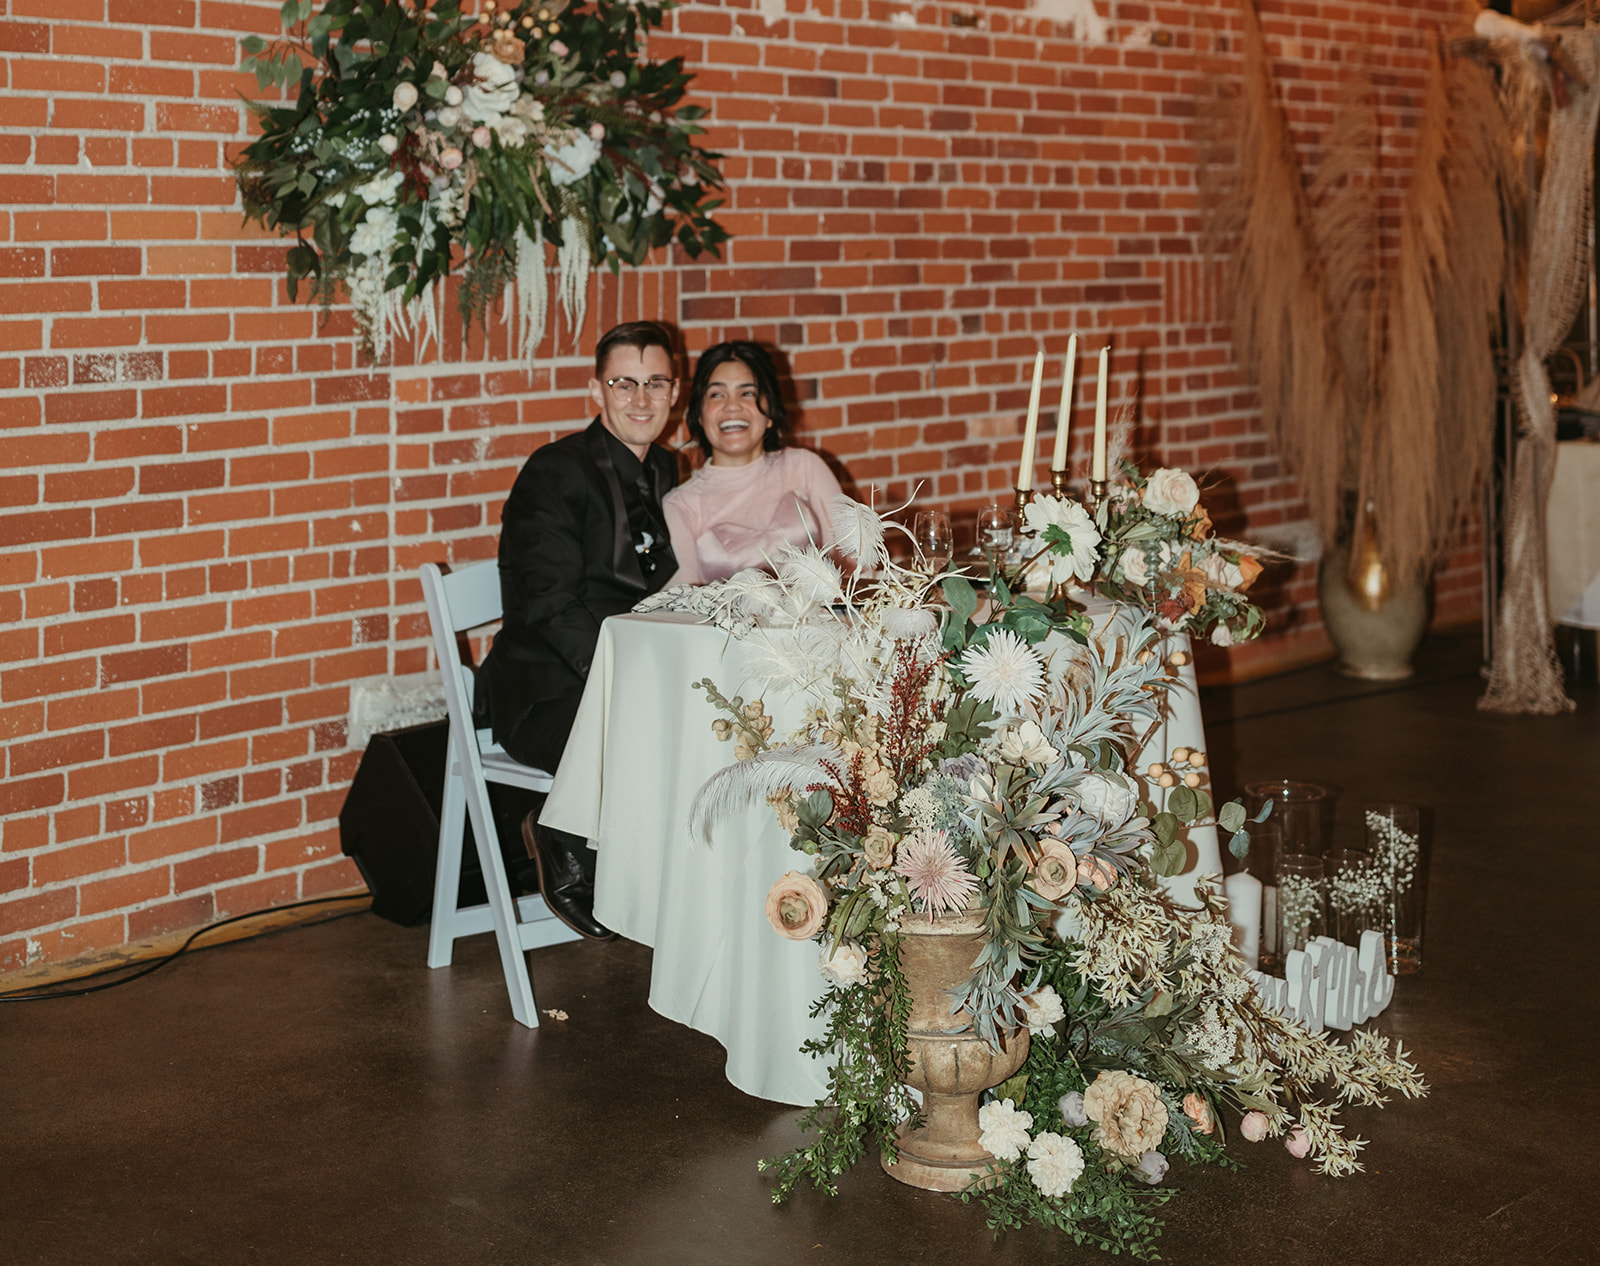 Sweetheart table at vintage inspired wedding, floral decor inspiration